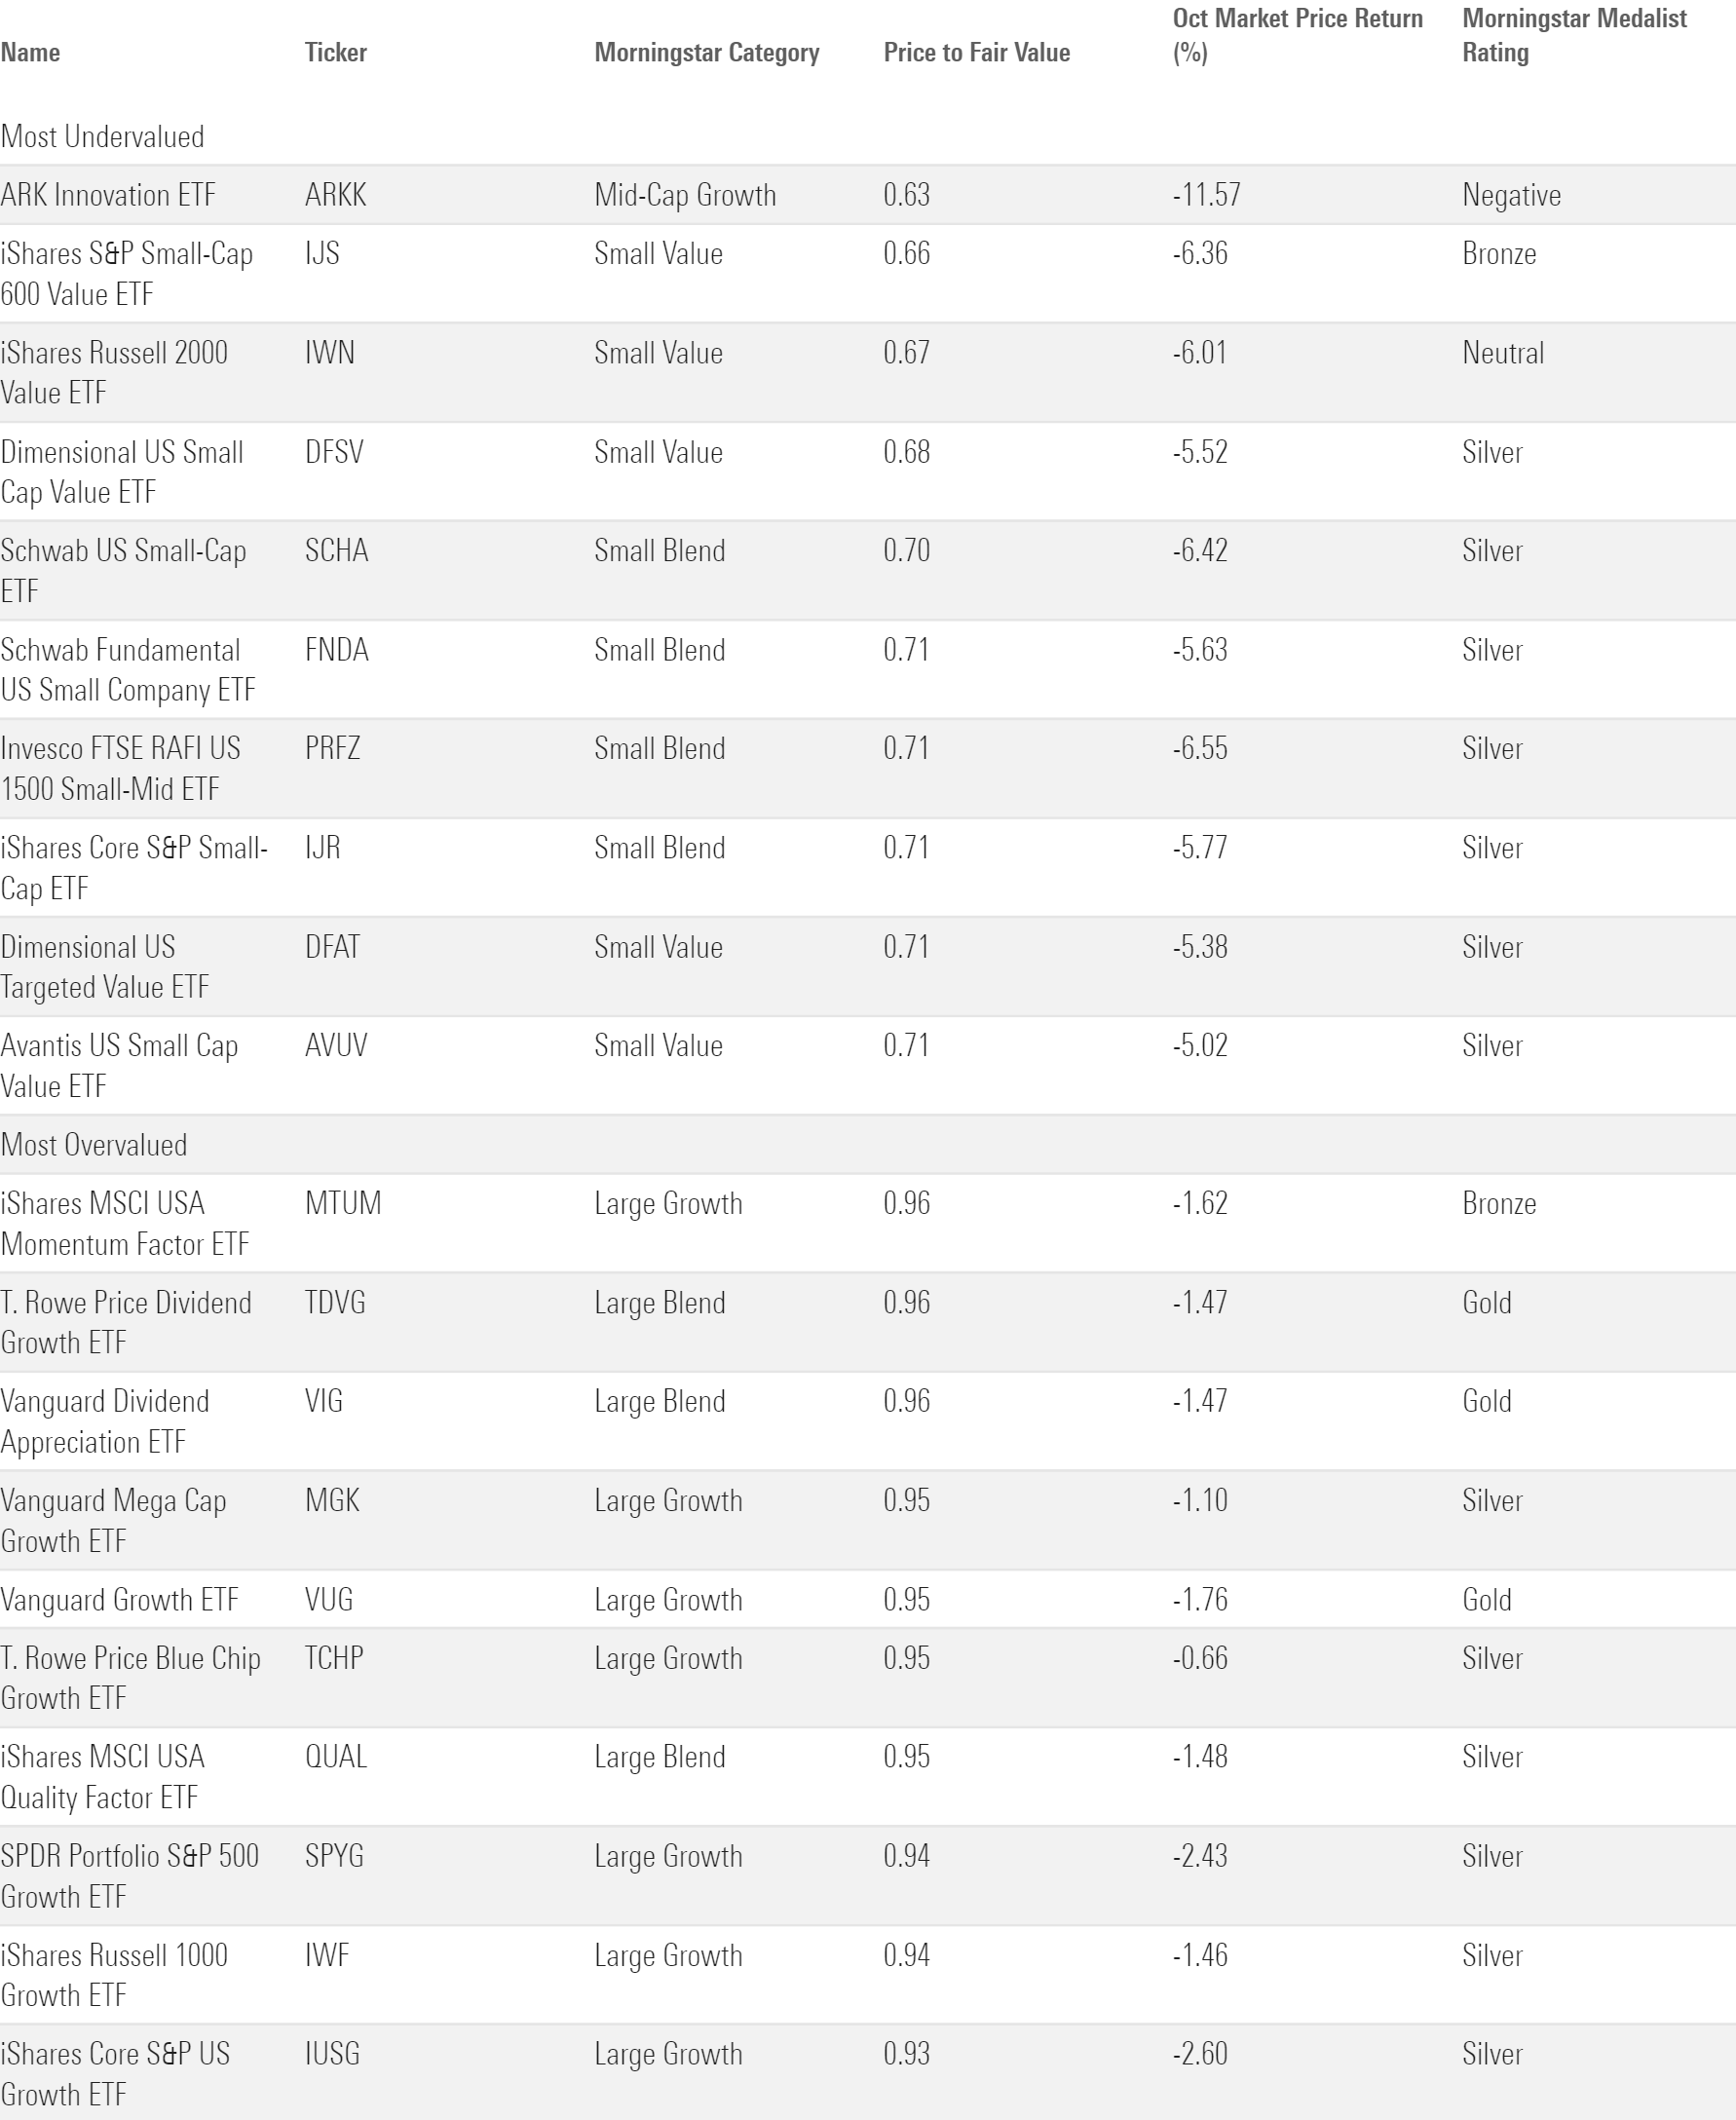 Table that shows the 10 most under- and overvalued analyst-rated ETFs according to Morningstar's price/fair value metric.